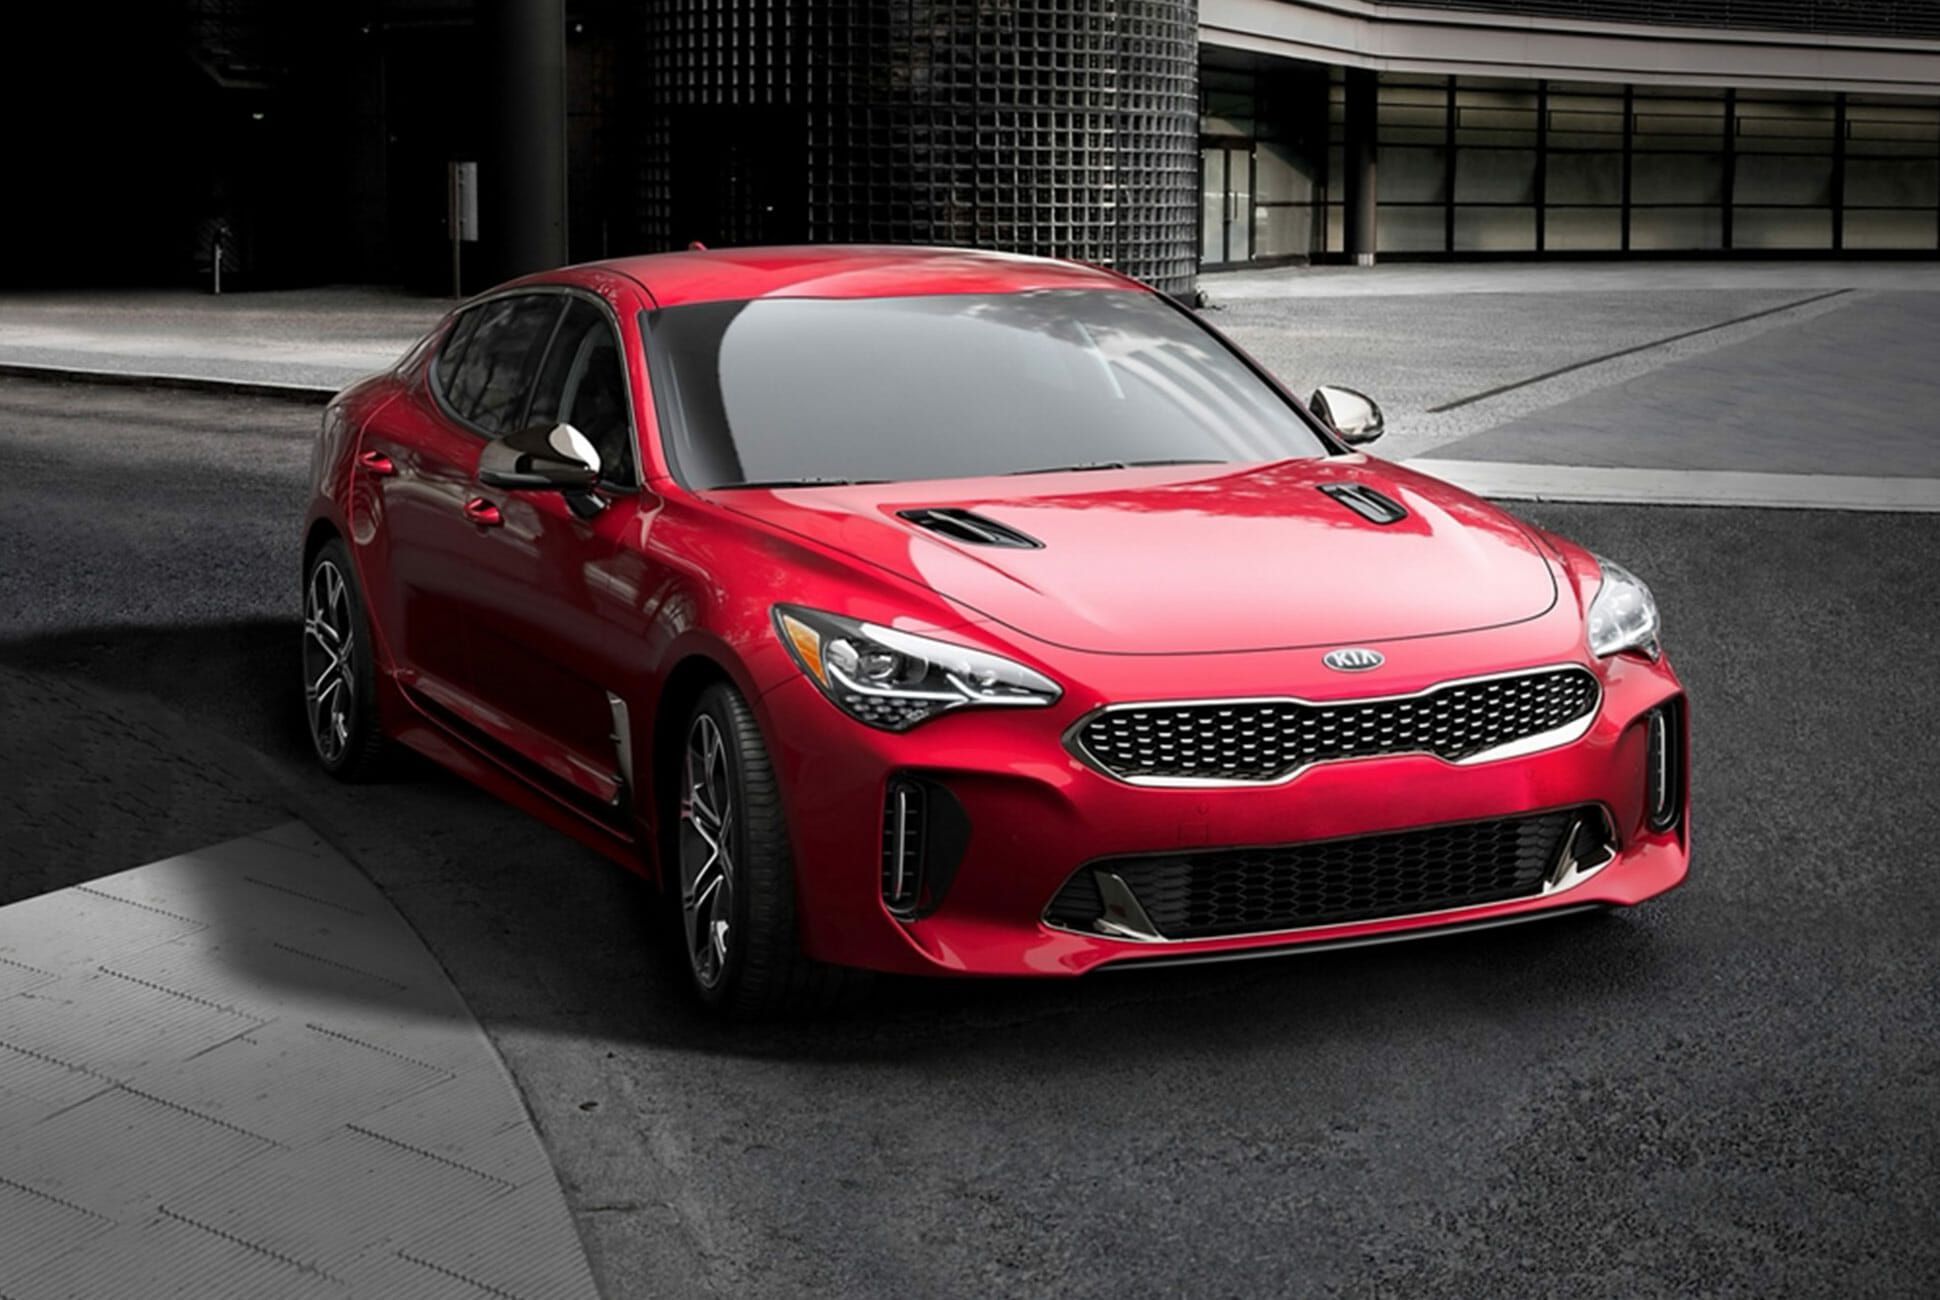 2020 Kia Stinger 2.0T Review: Everything But the Horsepower